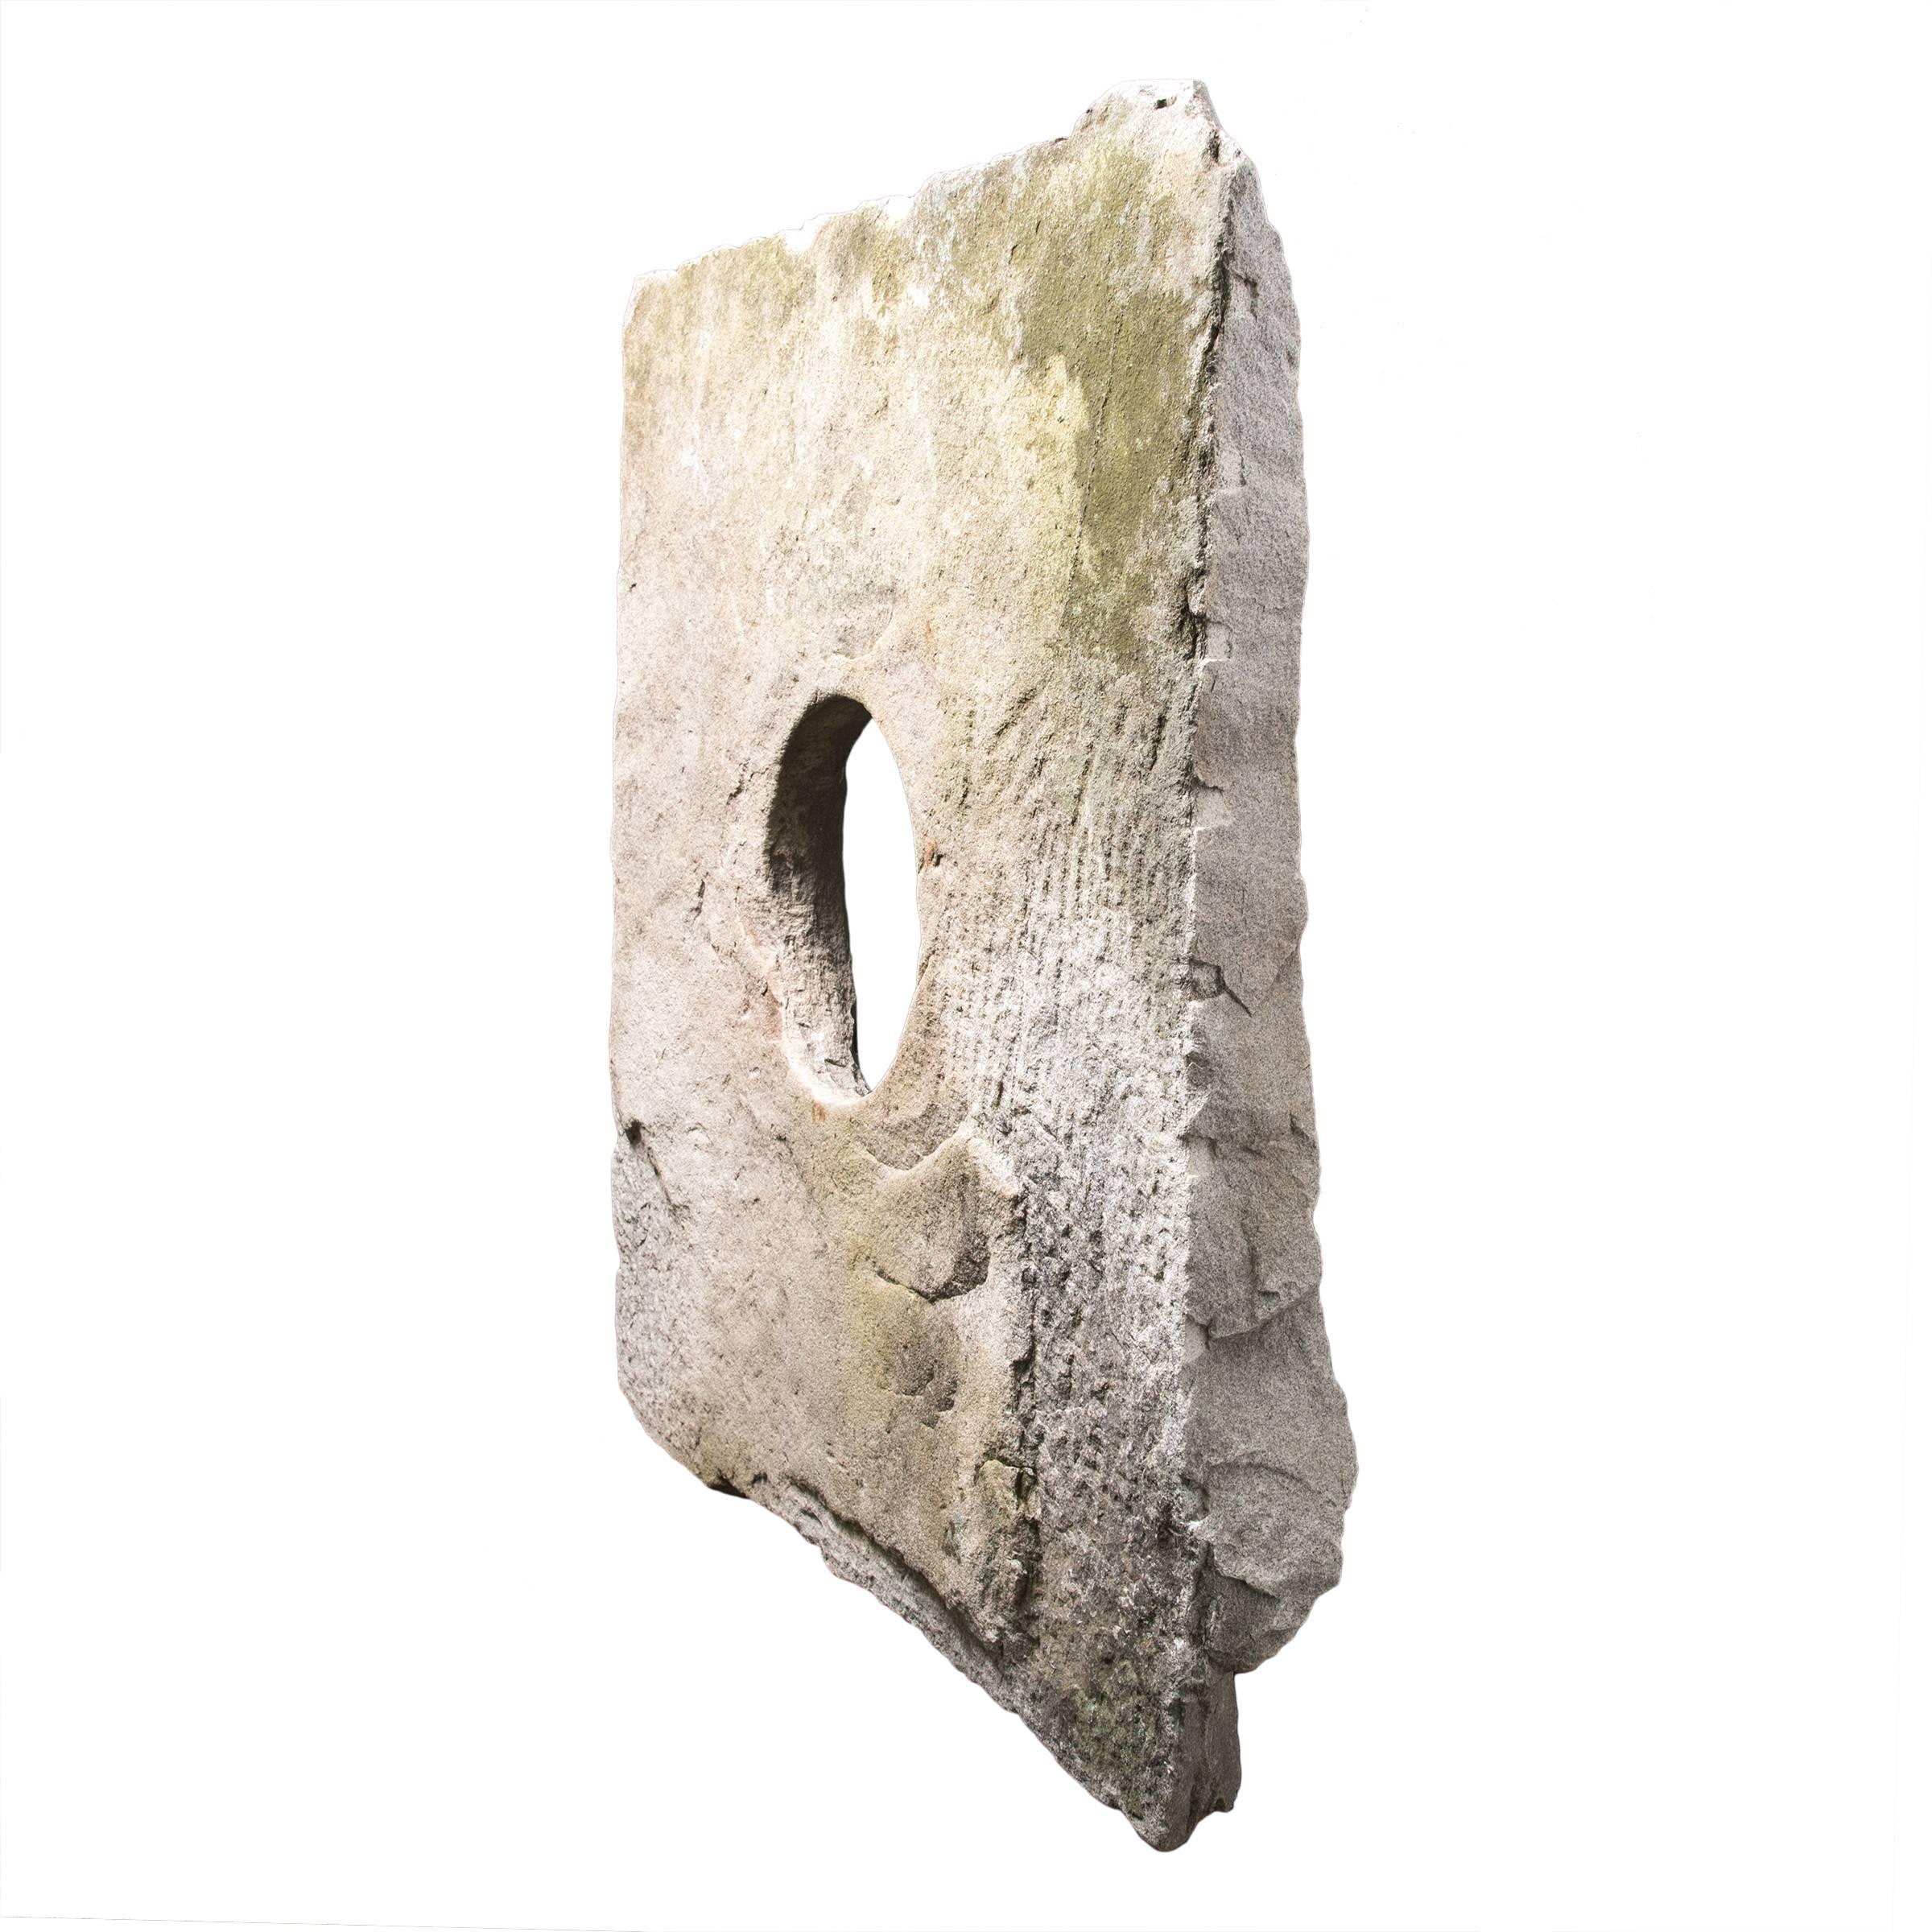 A traditional stone well head can be used to create an unusual and unique focal point in your garden. This 18th century limestone surround comes with a custom metal stand. It was recovered from a farm in Maine and is a lovely example of a typical